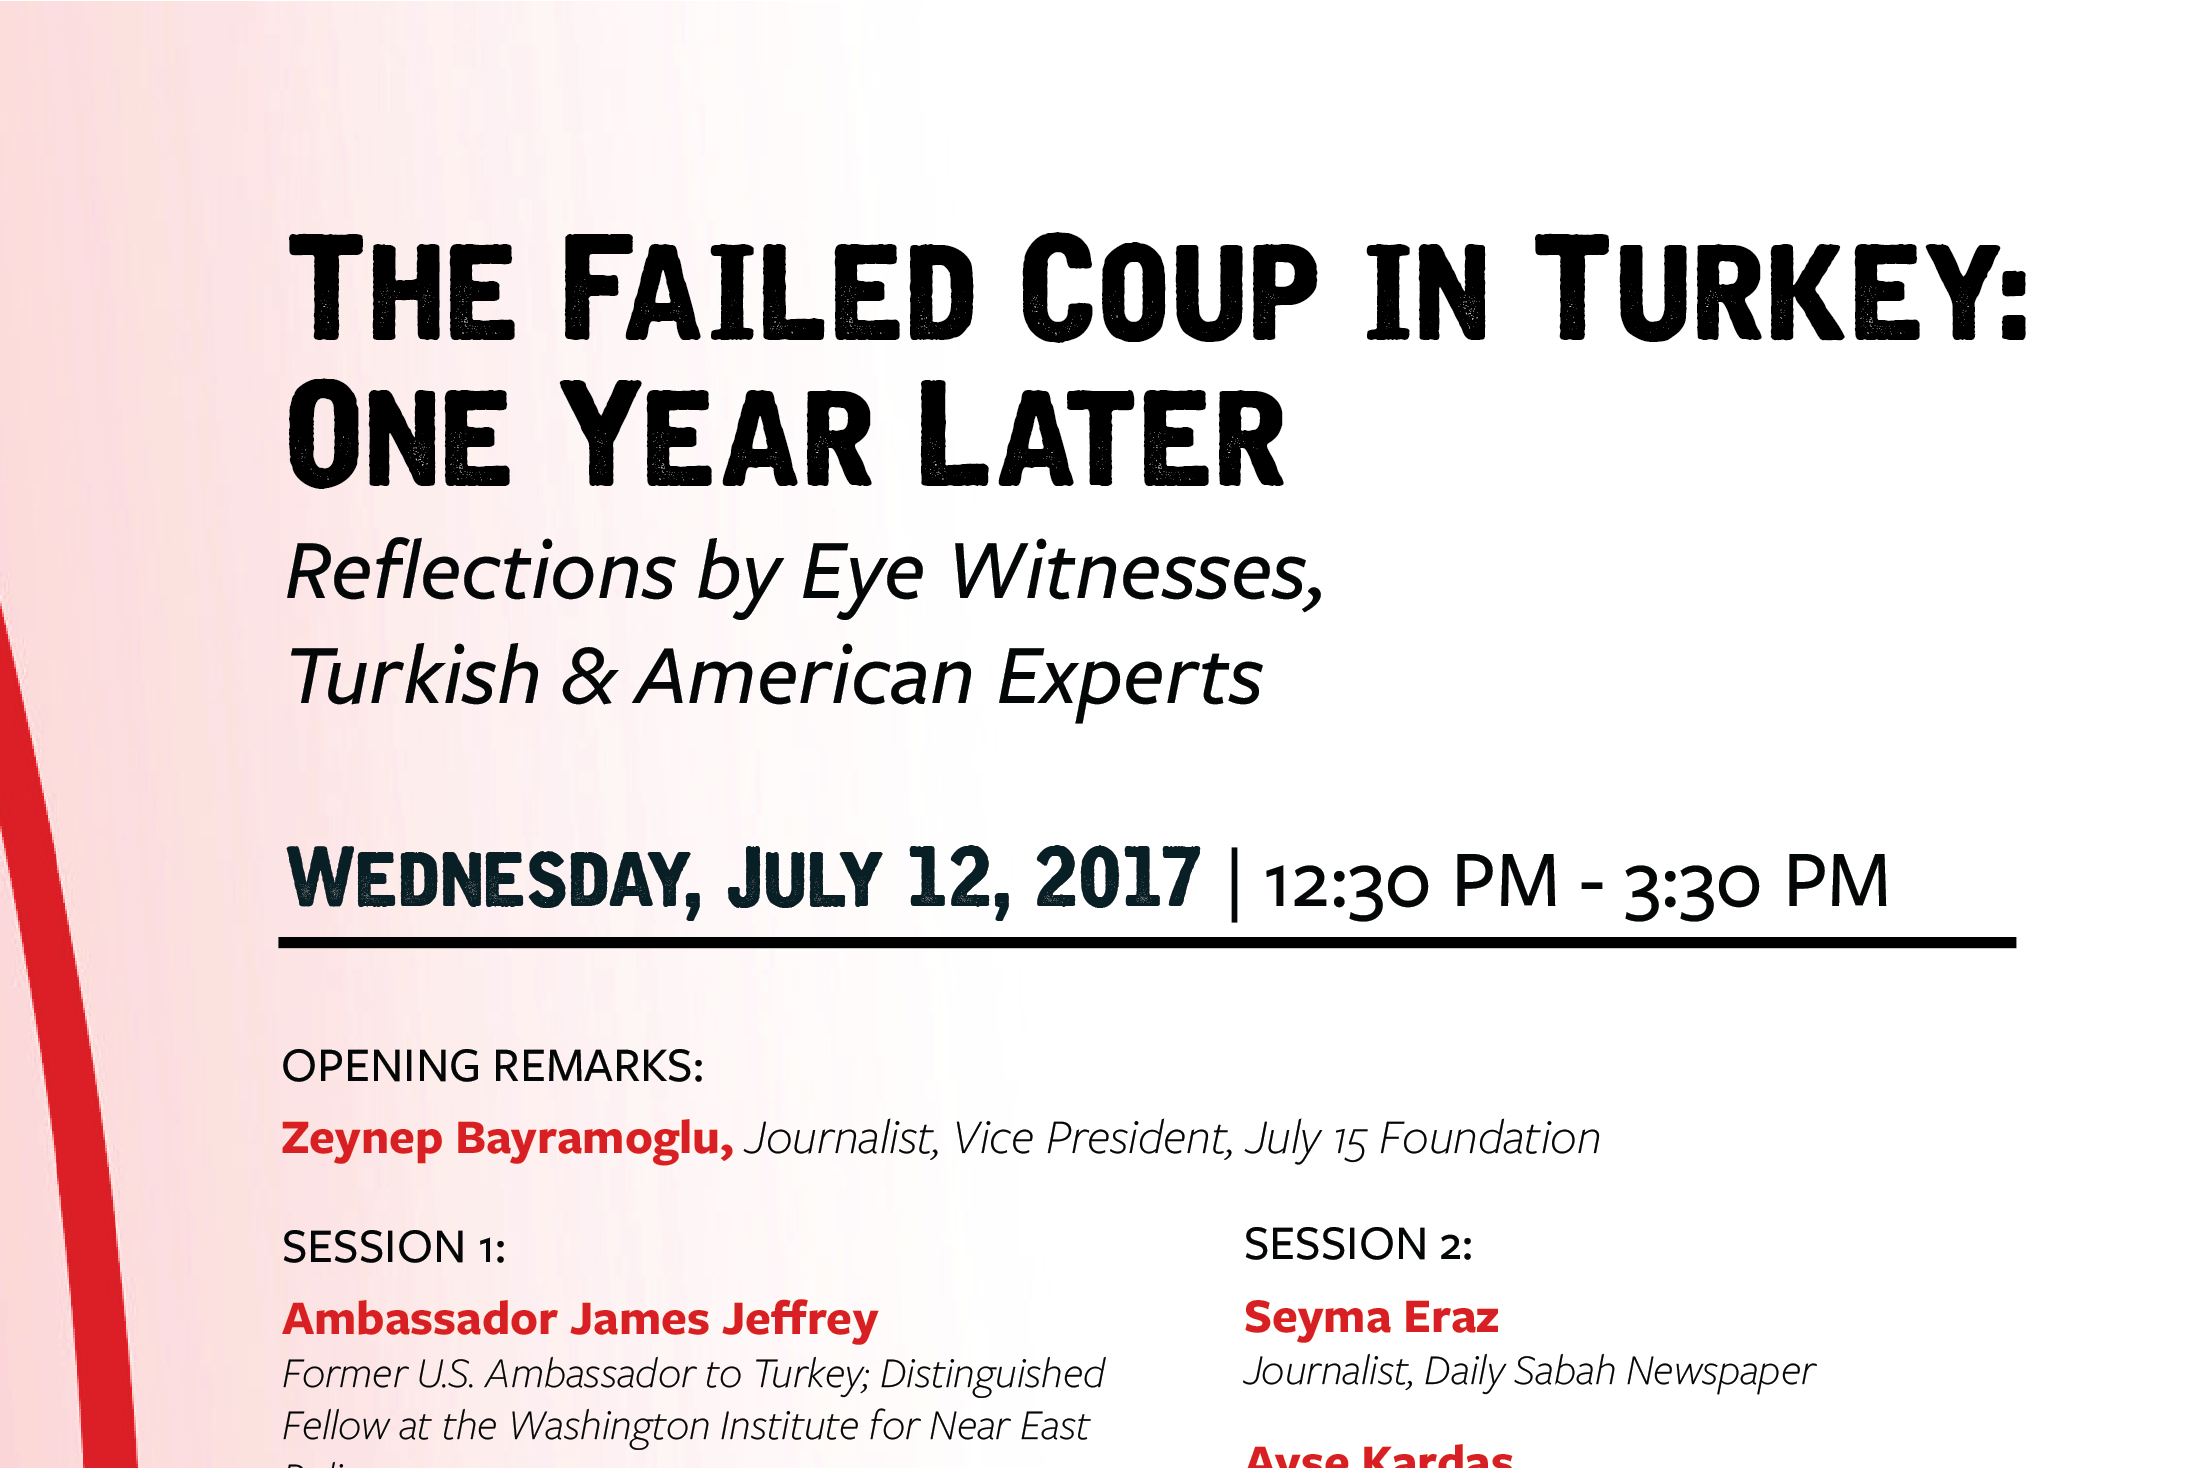 Event: One Year Later: The Failed Coup in Turkey